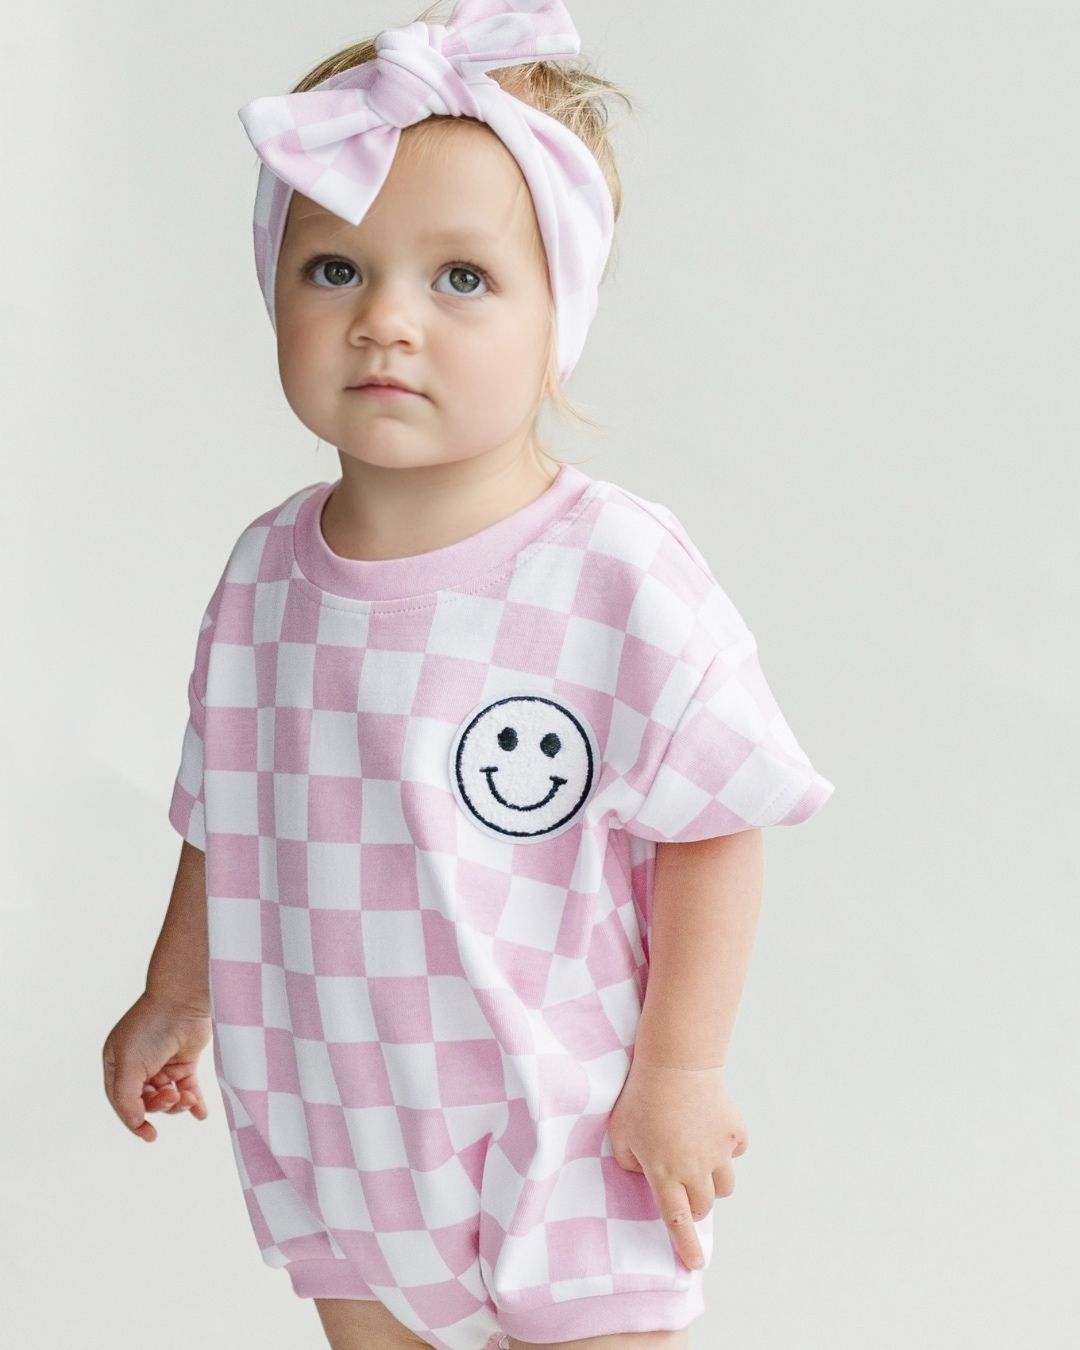 Short Sleeve Bubble Romper | Checkered Smiley Pink - LUCKY PANDA KIDS